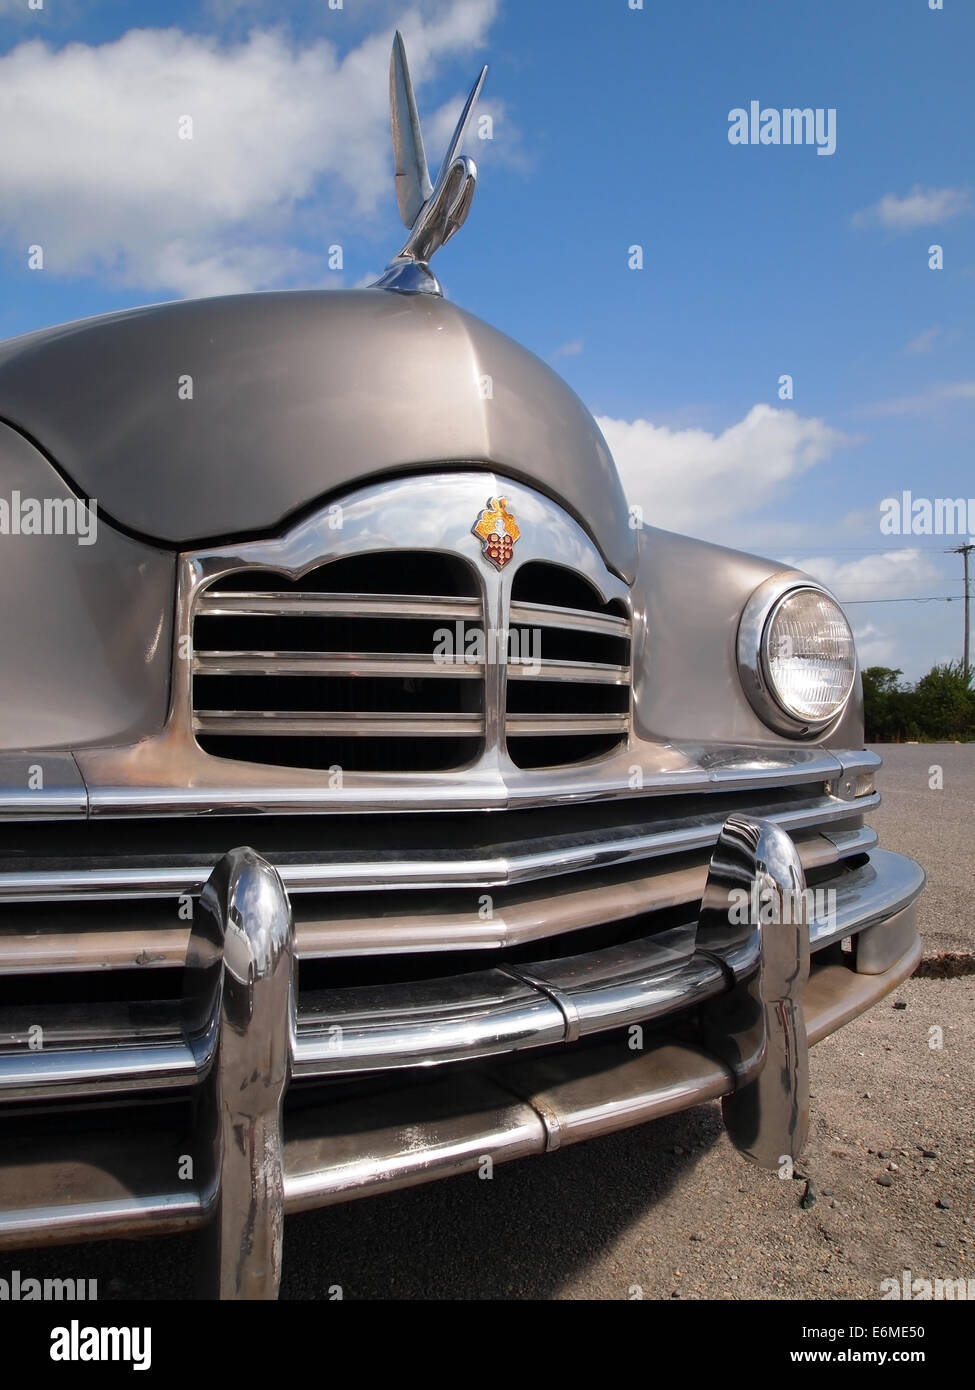 FENWICK ISLAND, DELAWARE - AUGUST 23, 2014: A vintage Packard automobile with swan hood ornament is on display in a parking lot. Stock Photo